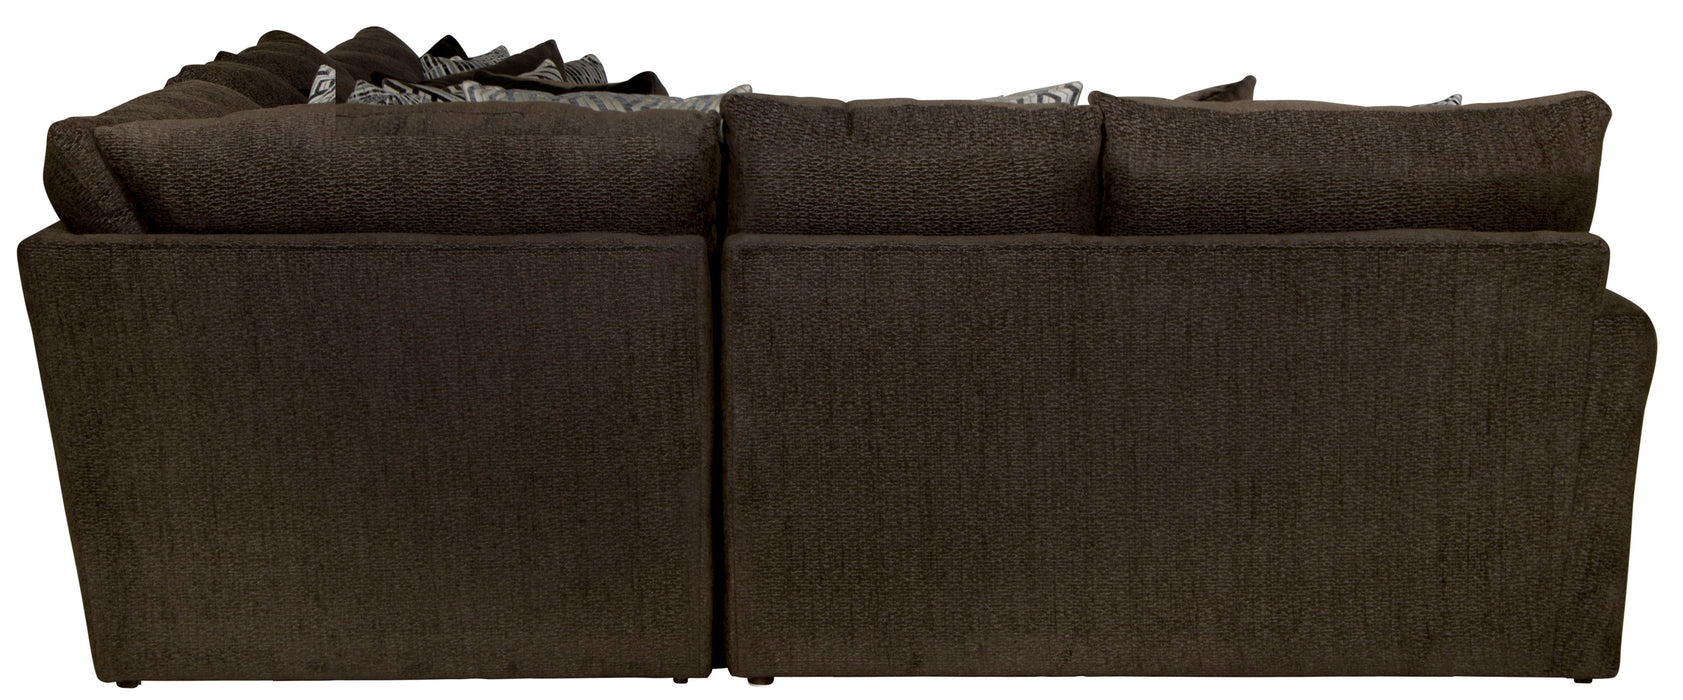 Galaxy - 2 Piece Sectional With 9 Included Accent Pillows